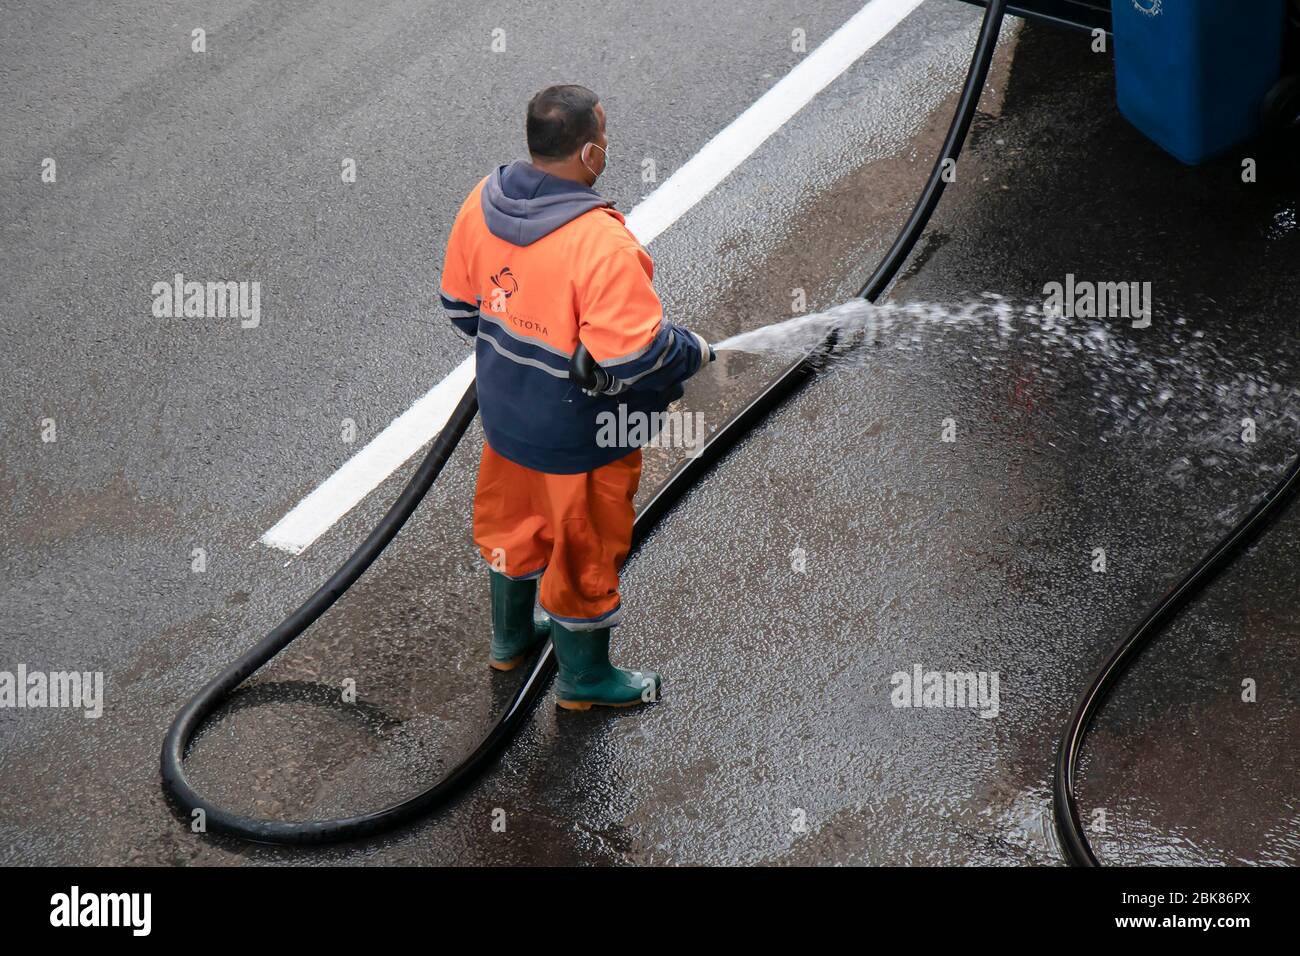 Belgrade, Serbia - April 24, 2020: Worker in orange uniform washing the street with water hose, high angle rear view; Stock Photo